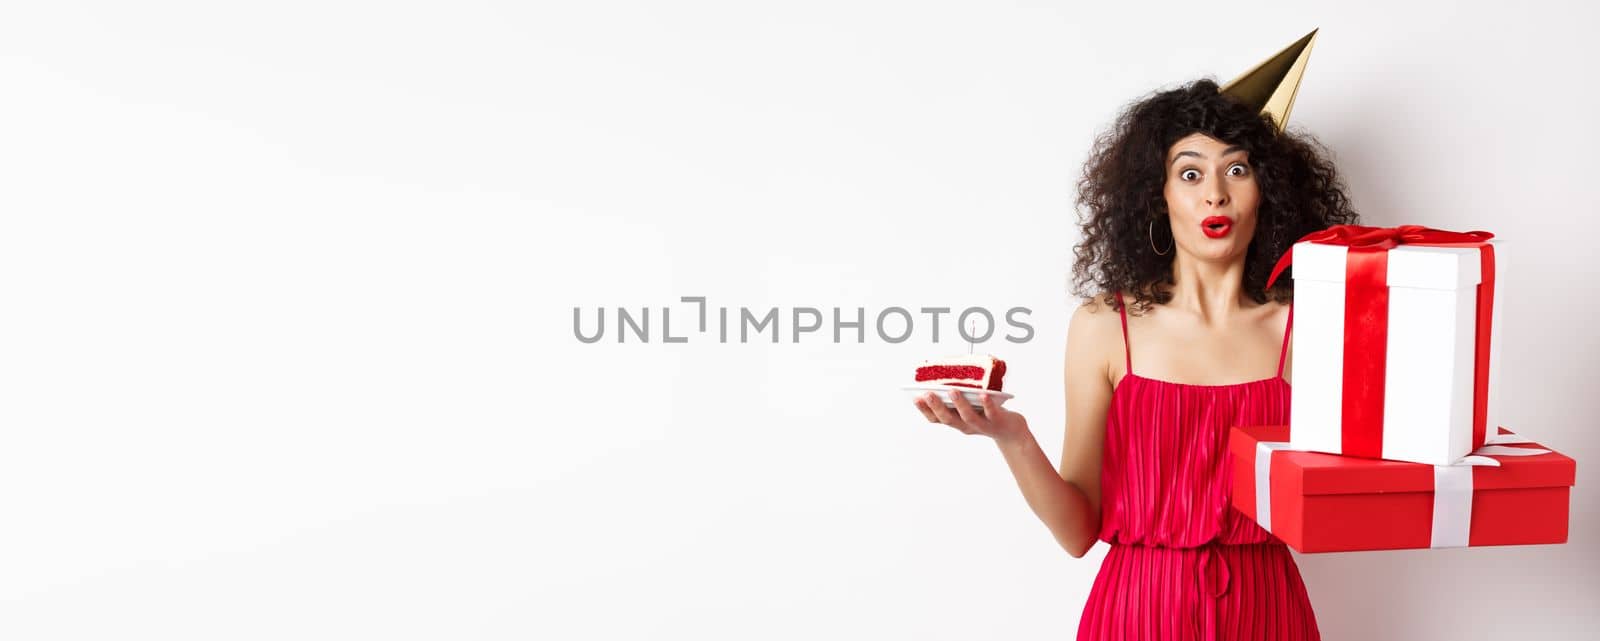 Funny lady in red dress and party hat, celebrating birthday, holding b-day presents and cake with candle, looking amused at camera, standing over white background by Benzoix